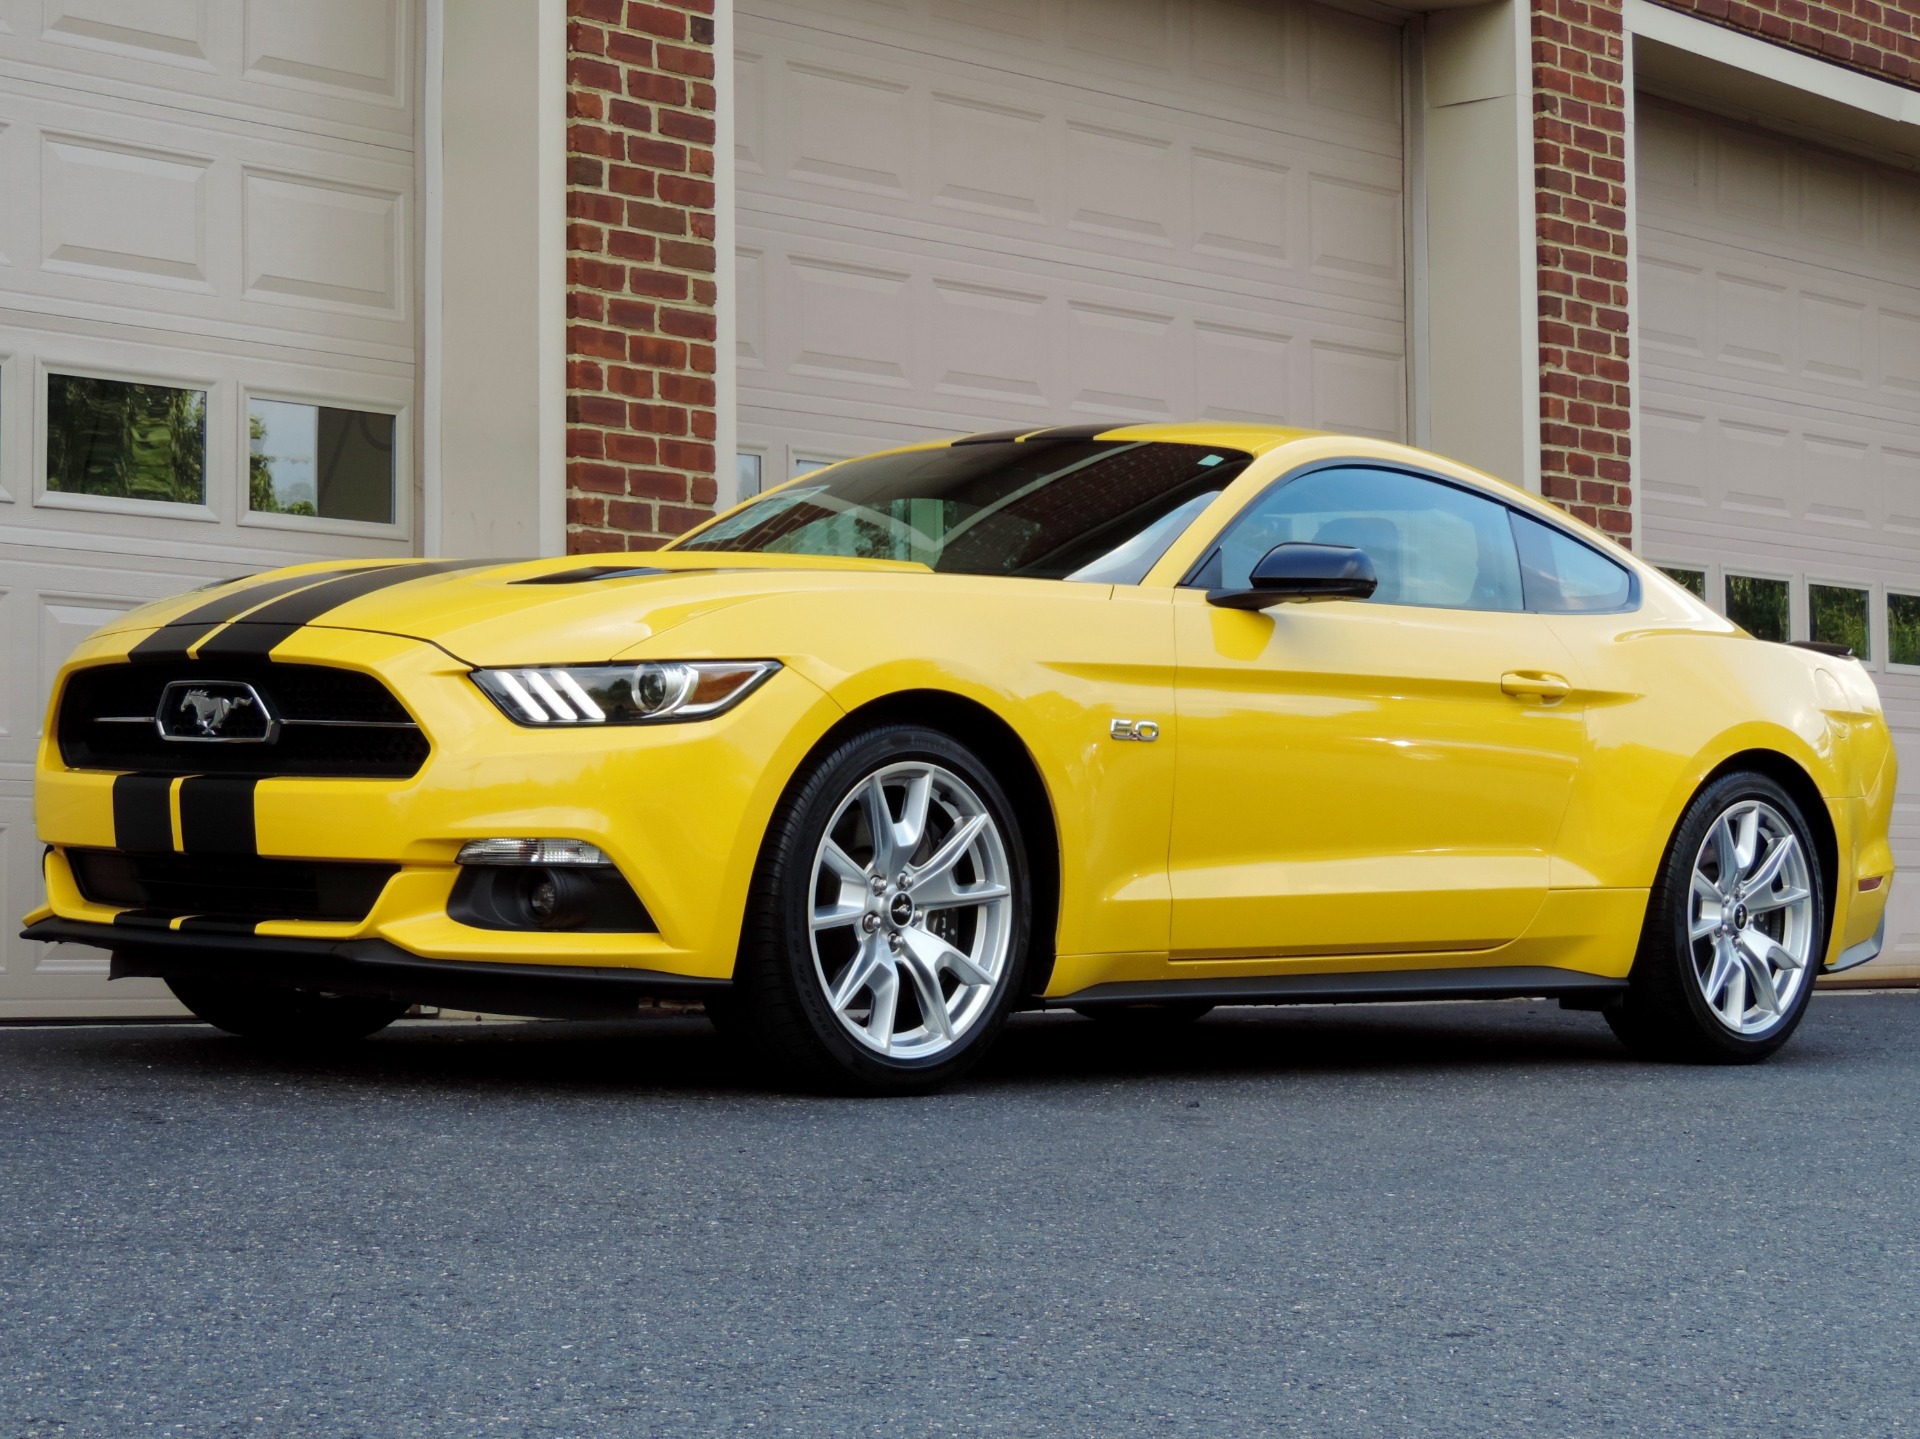 2015 Ford Mustang Gt Premium Stock 309939 For Sale Near Edgewater